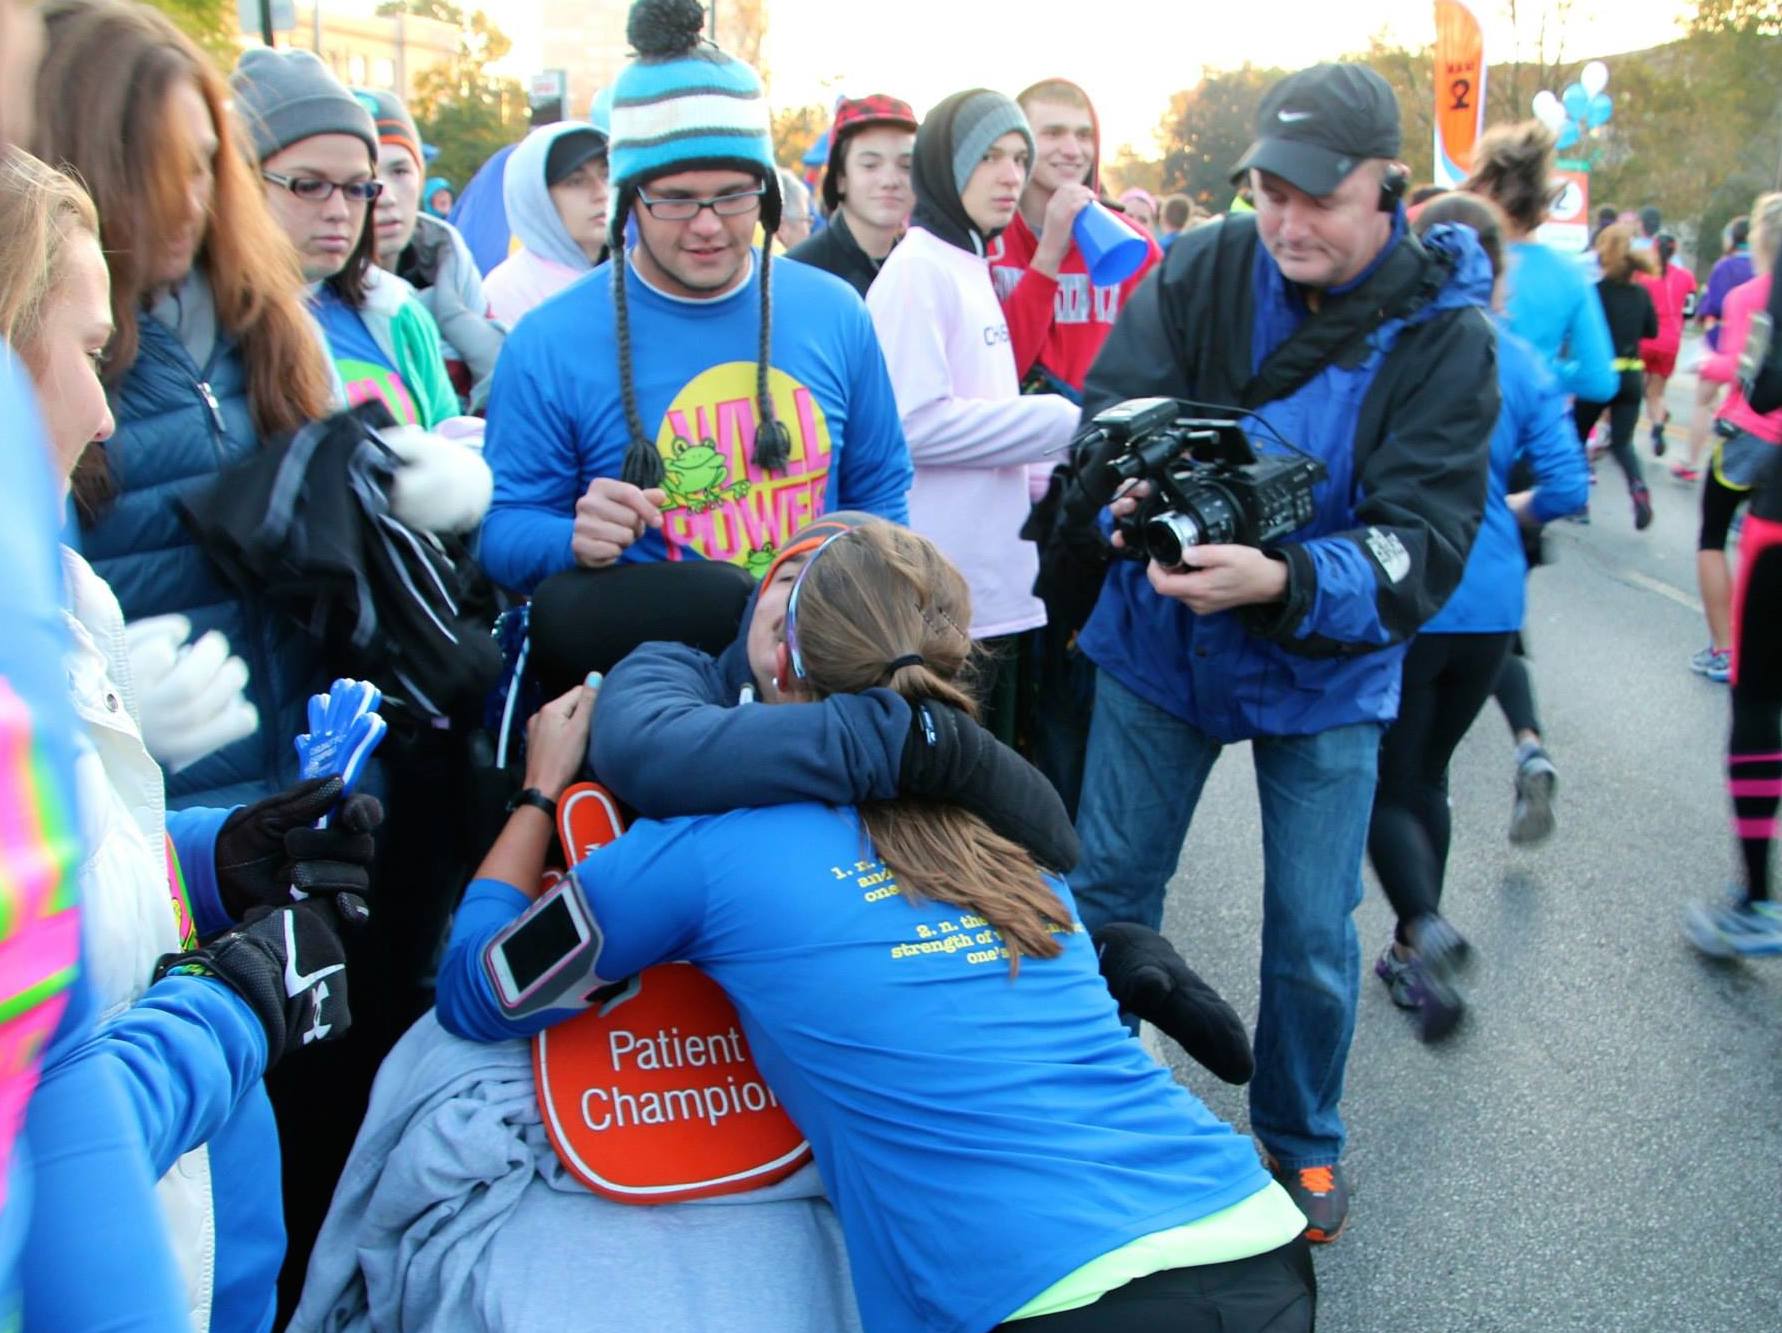 Will, being hugged by his sister, was chosen as one of the 2012 Patient Champions for the Columbus Marathon